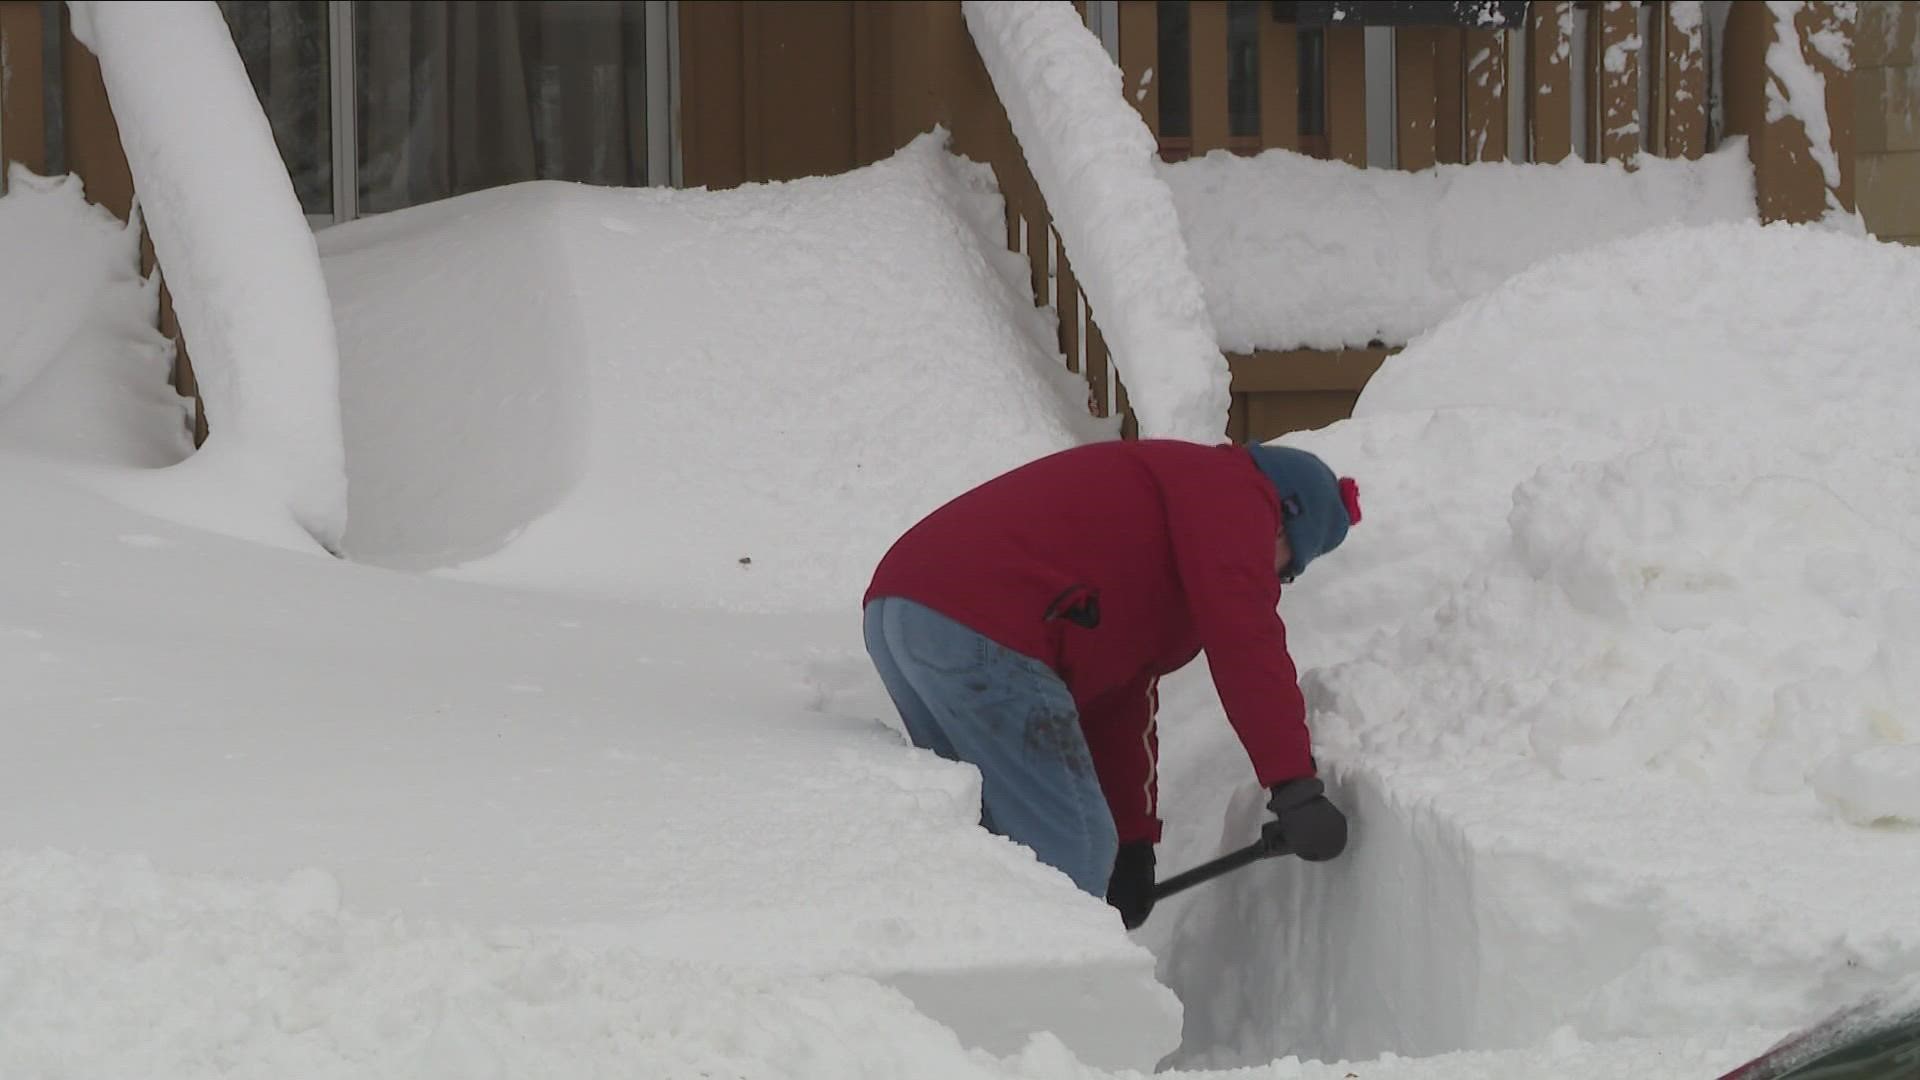 Snow removal efforts in South Buffalo